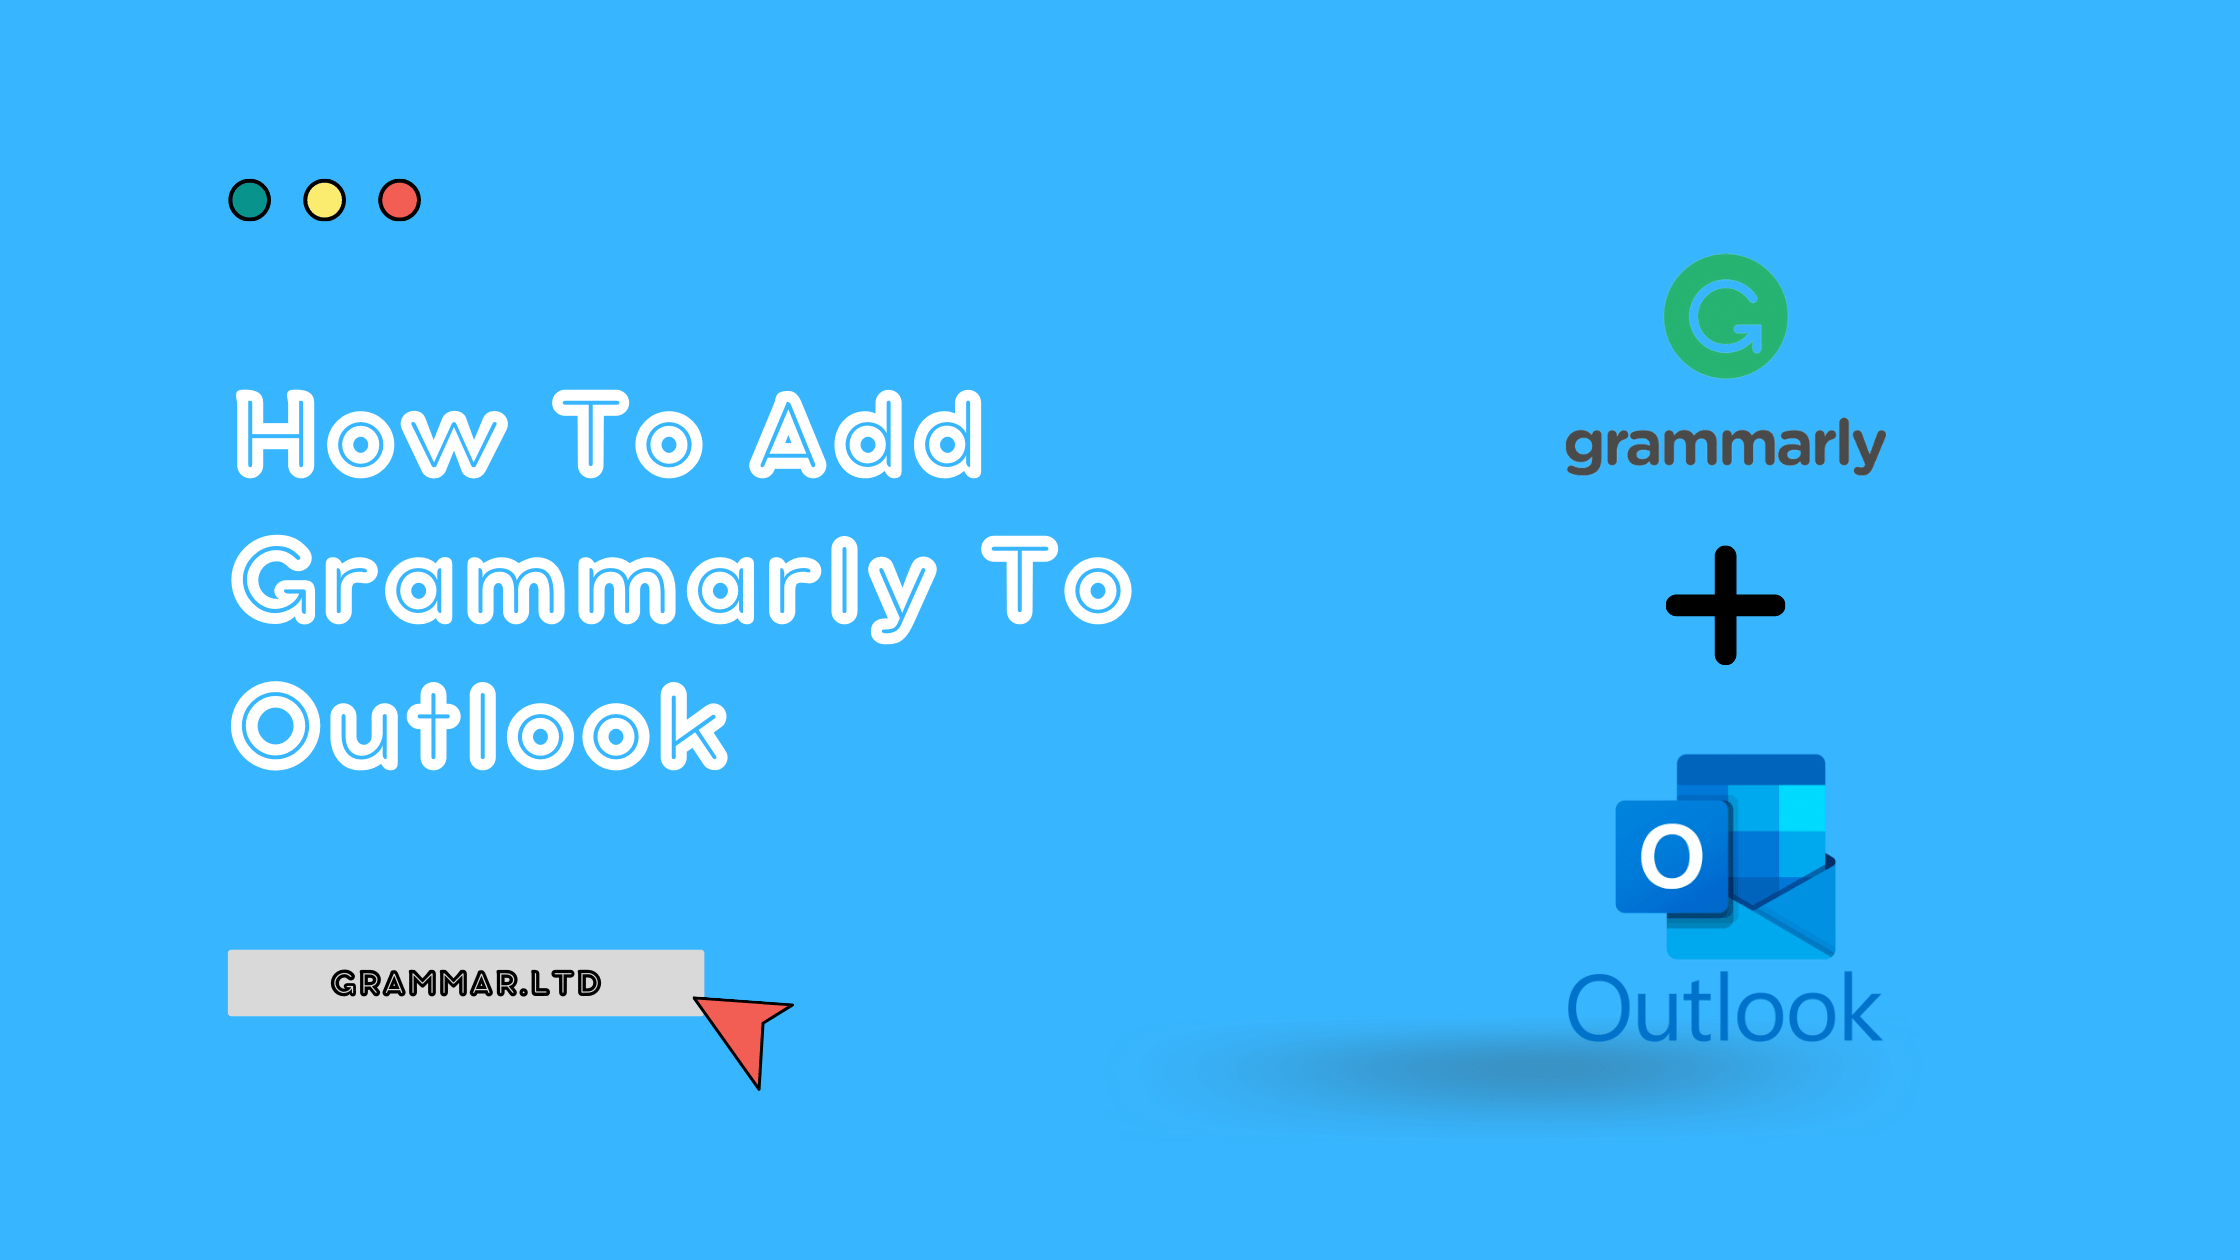 grammarly software for outlook free download